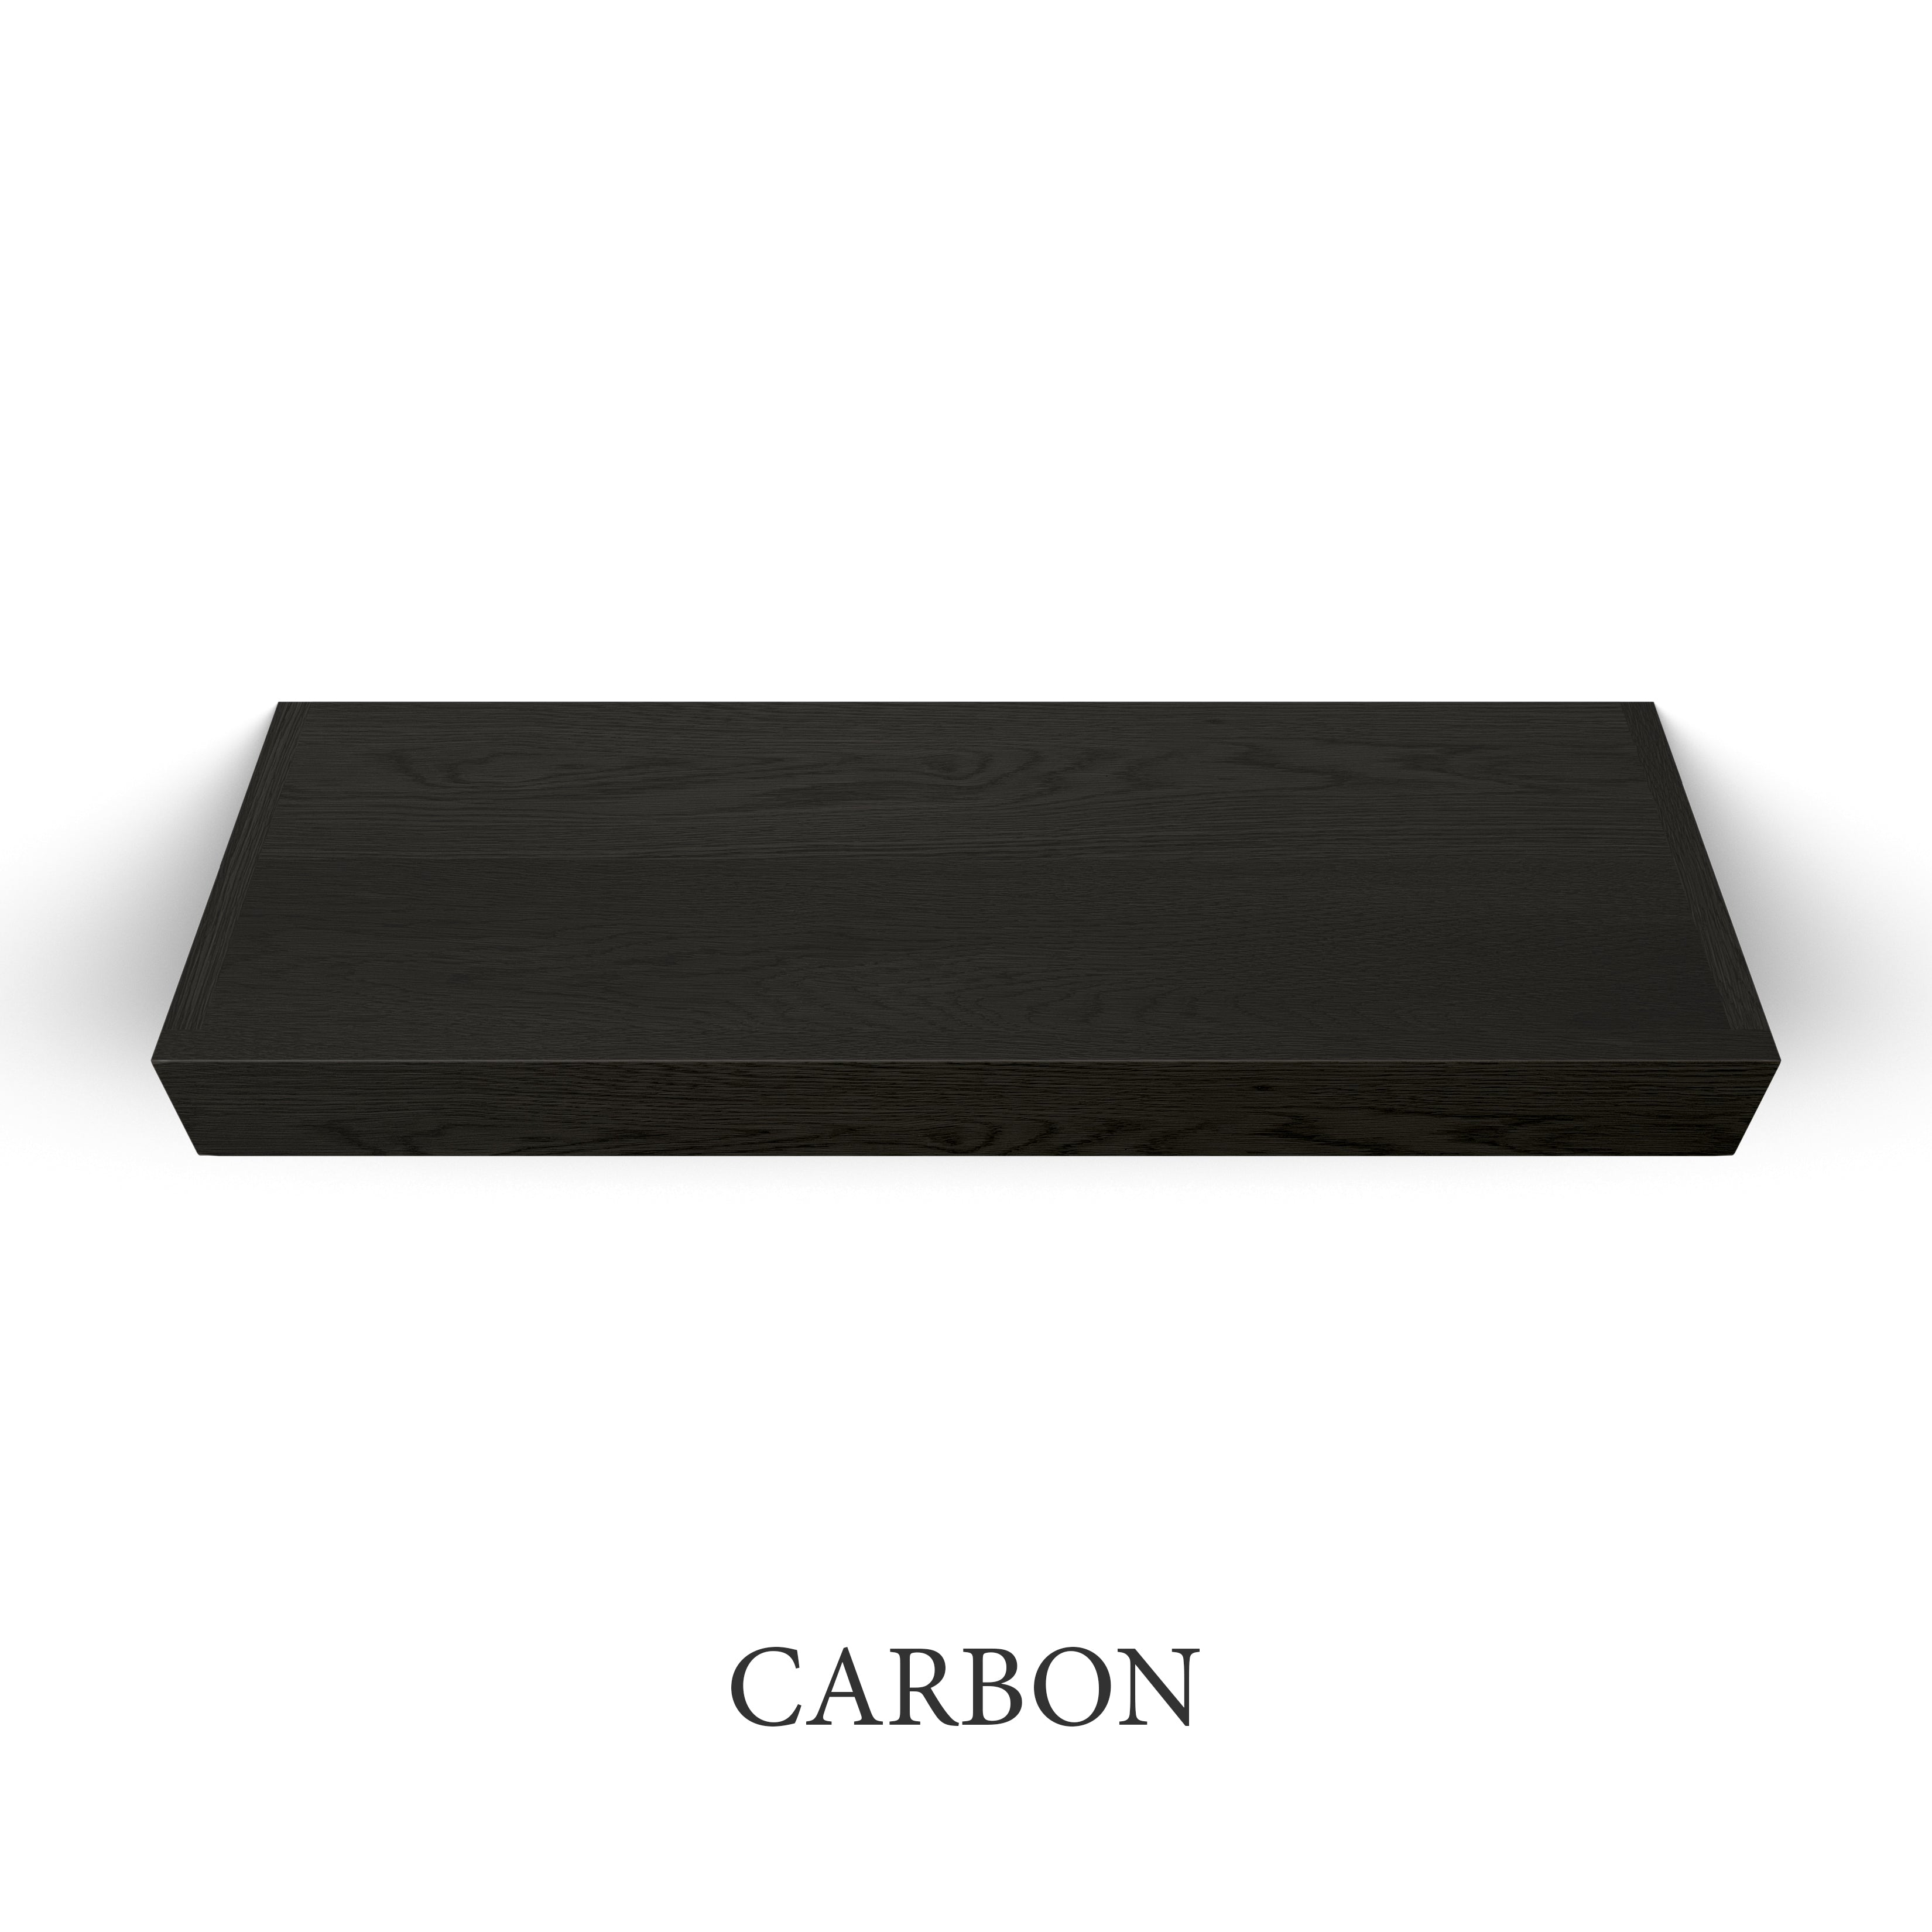 carbon White Oak 3 Inch Thick Floating Shelf